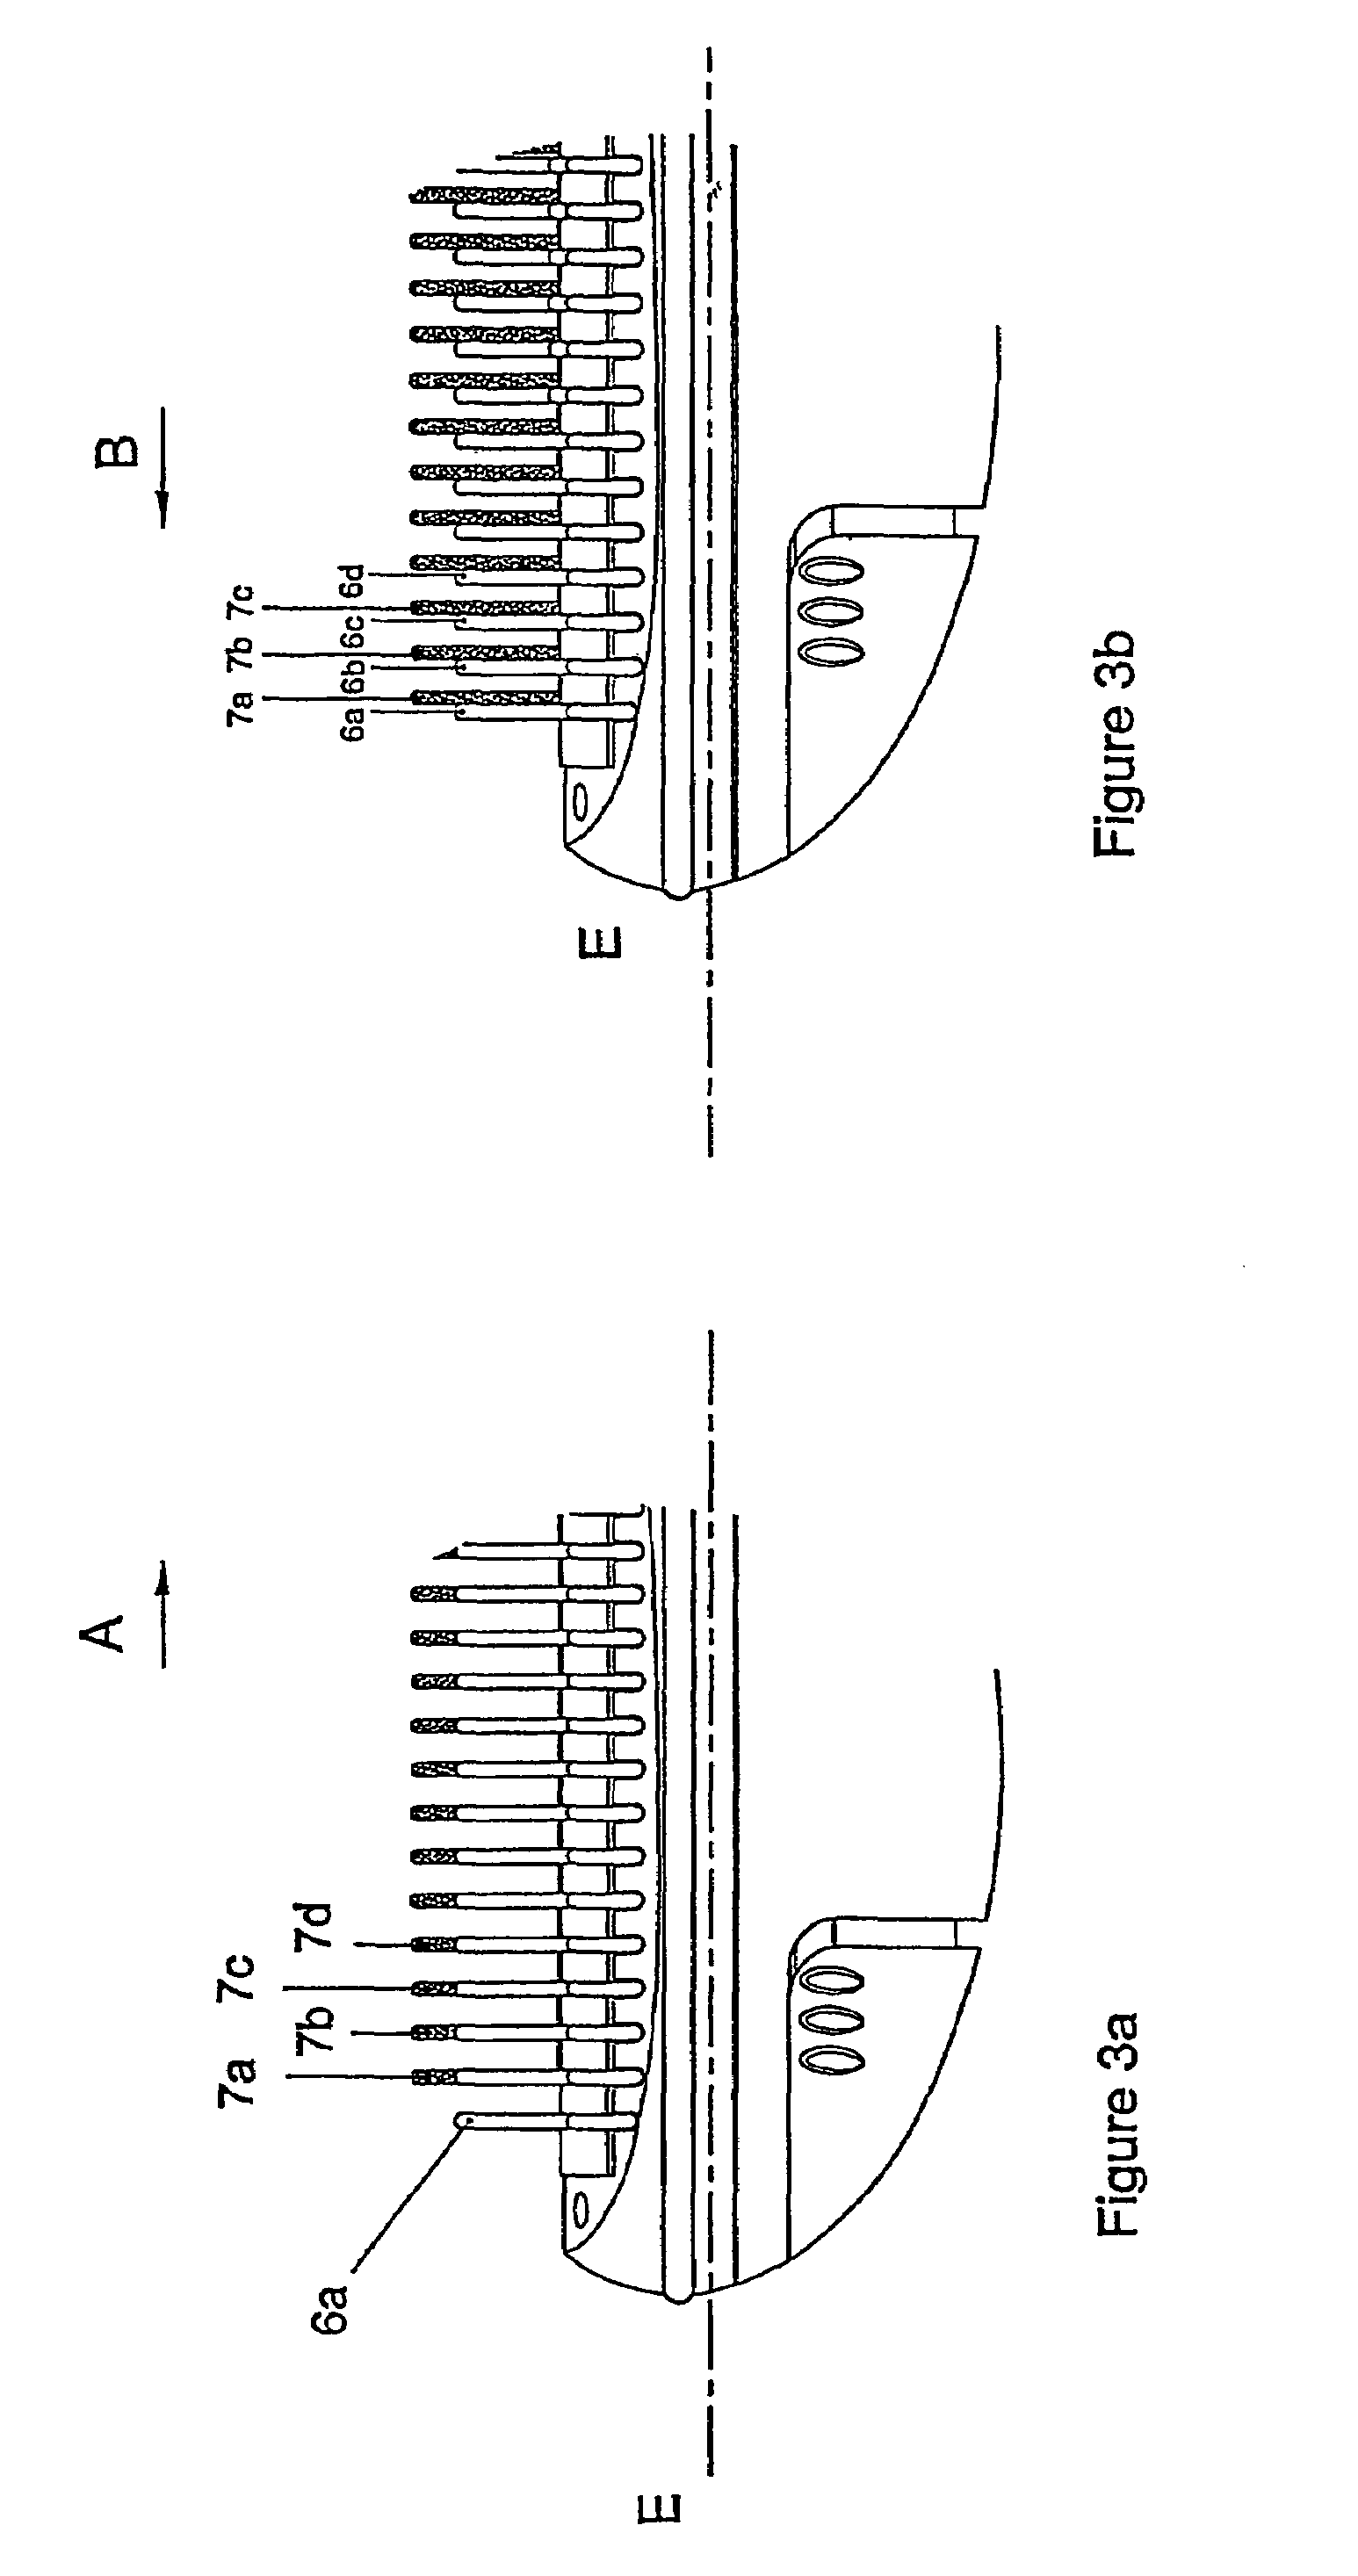 Hair straightening and styling device